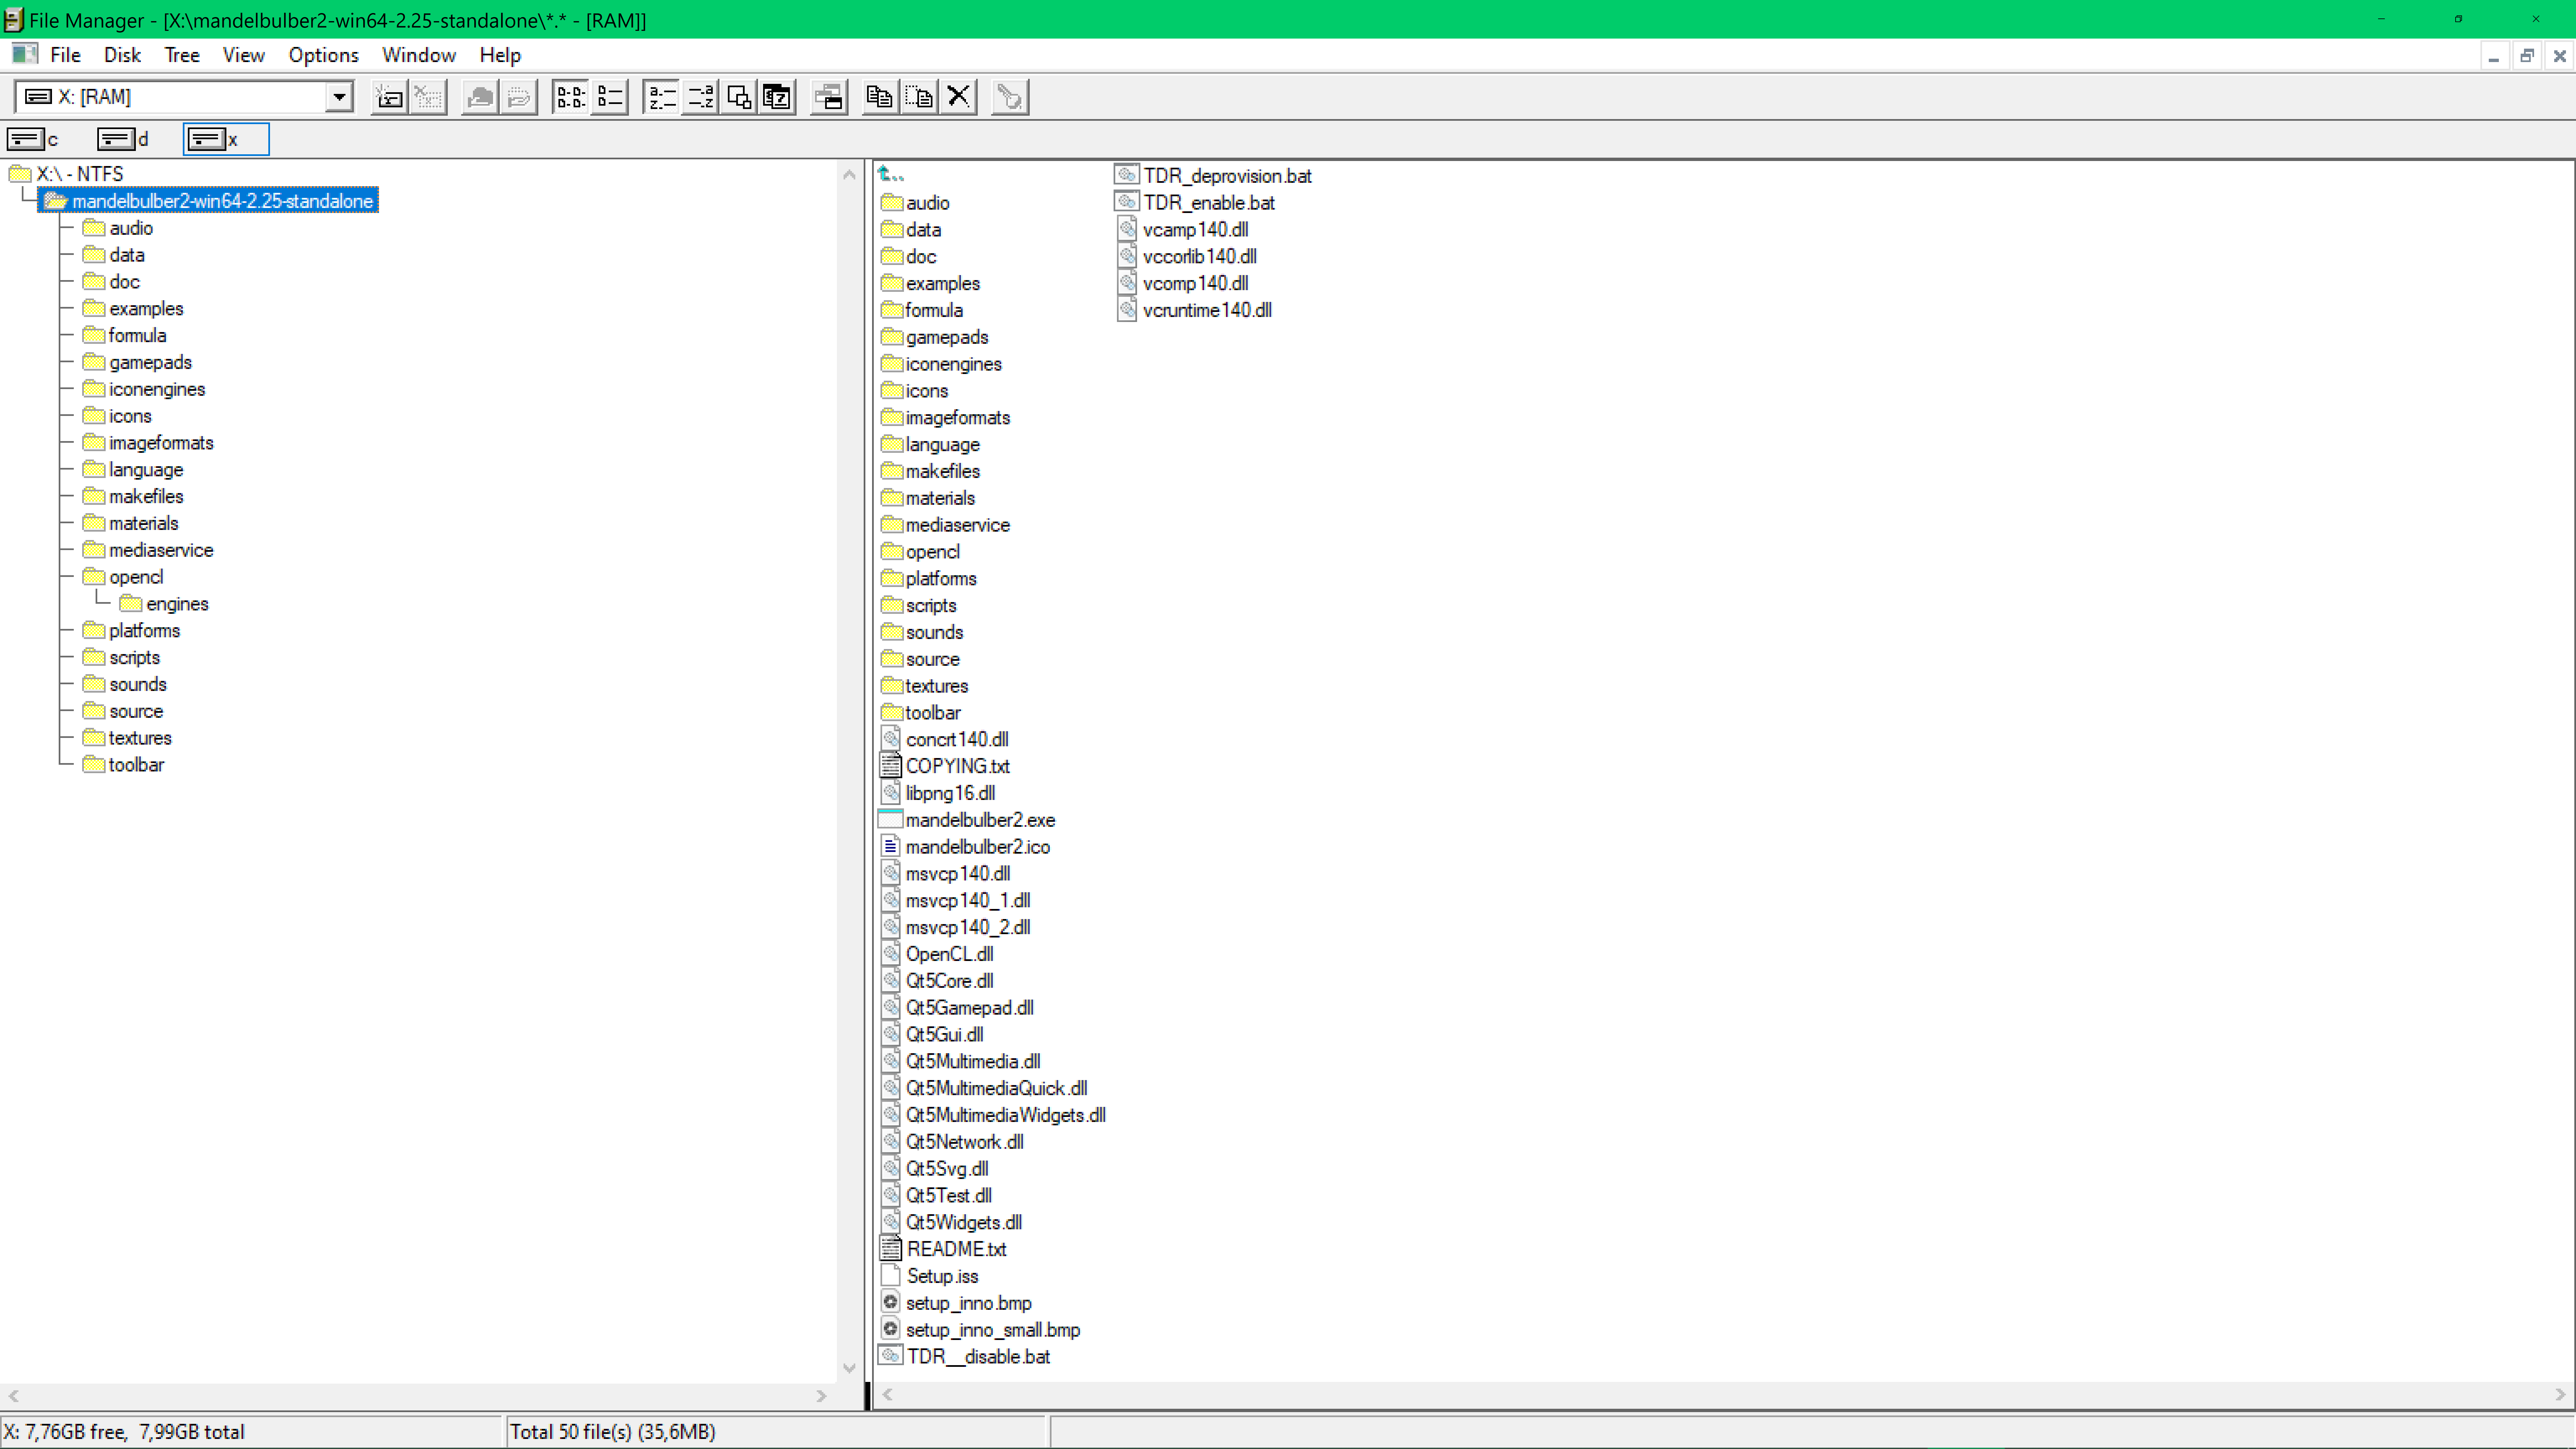 Open File Explorer by pressing Win + E.
Navigate to the C:\Users directory.